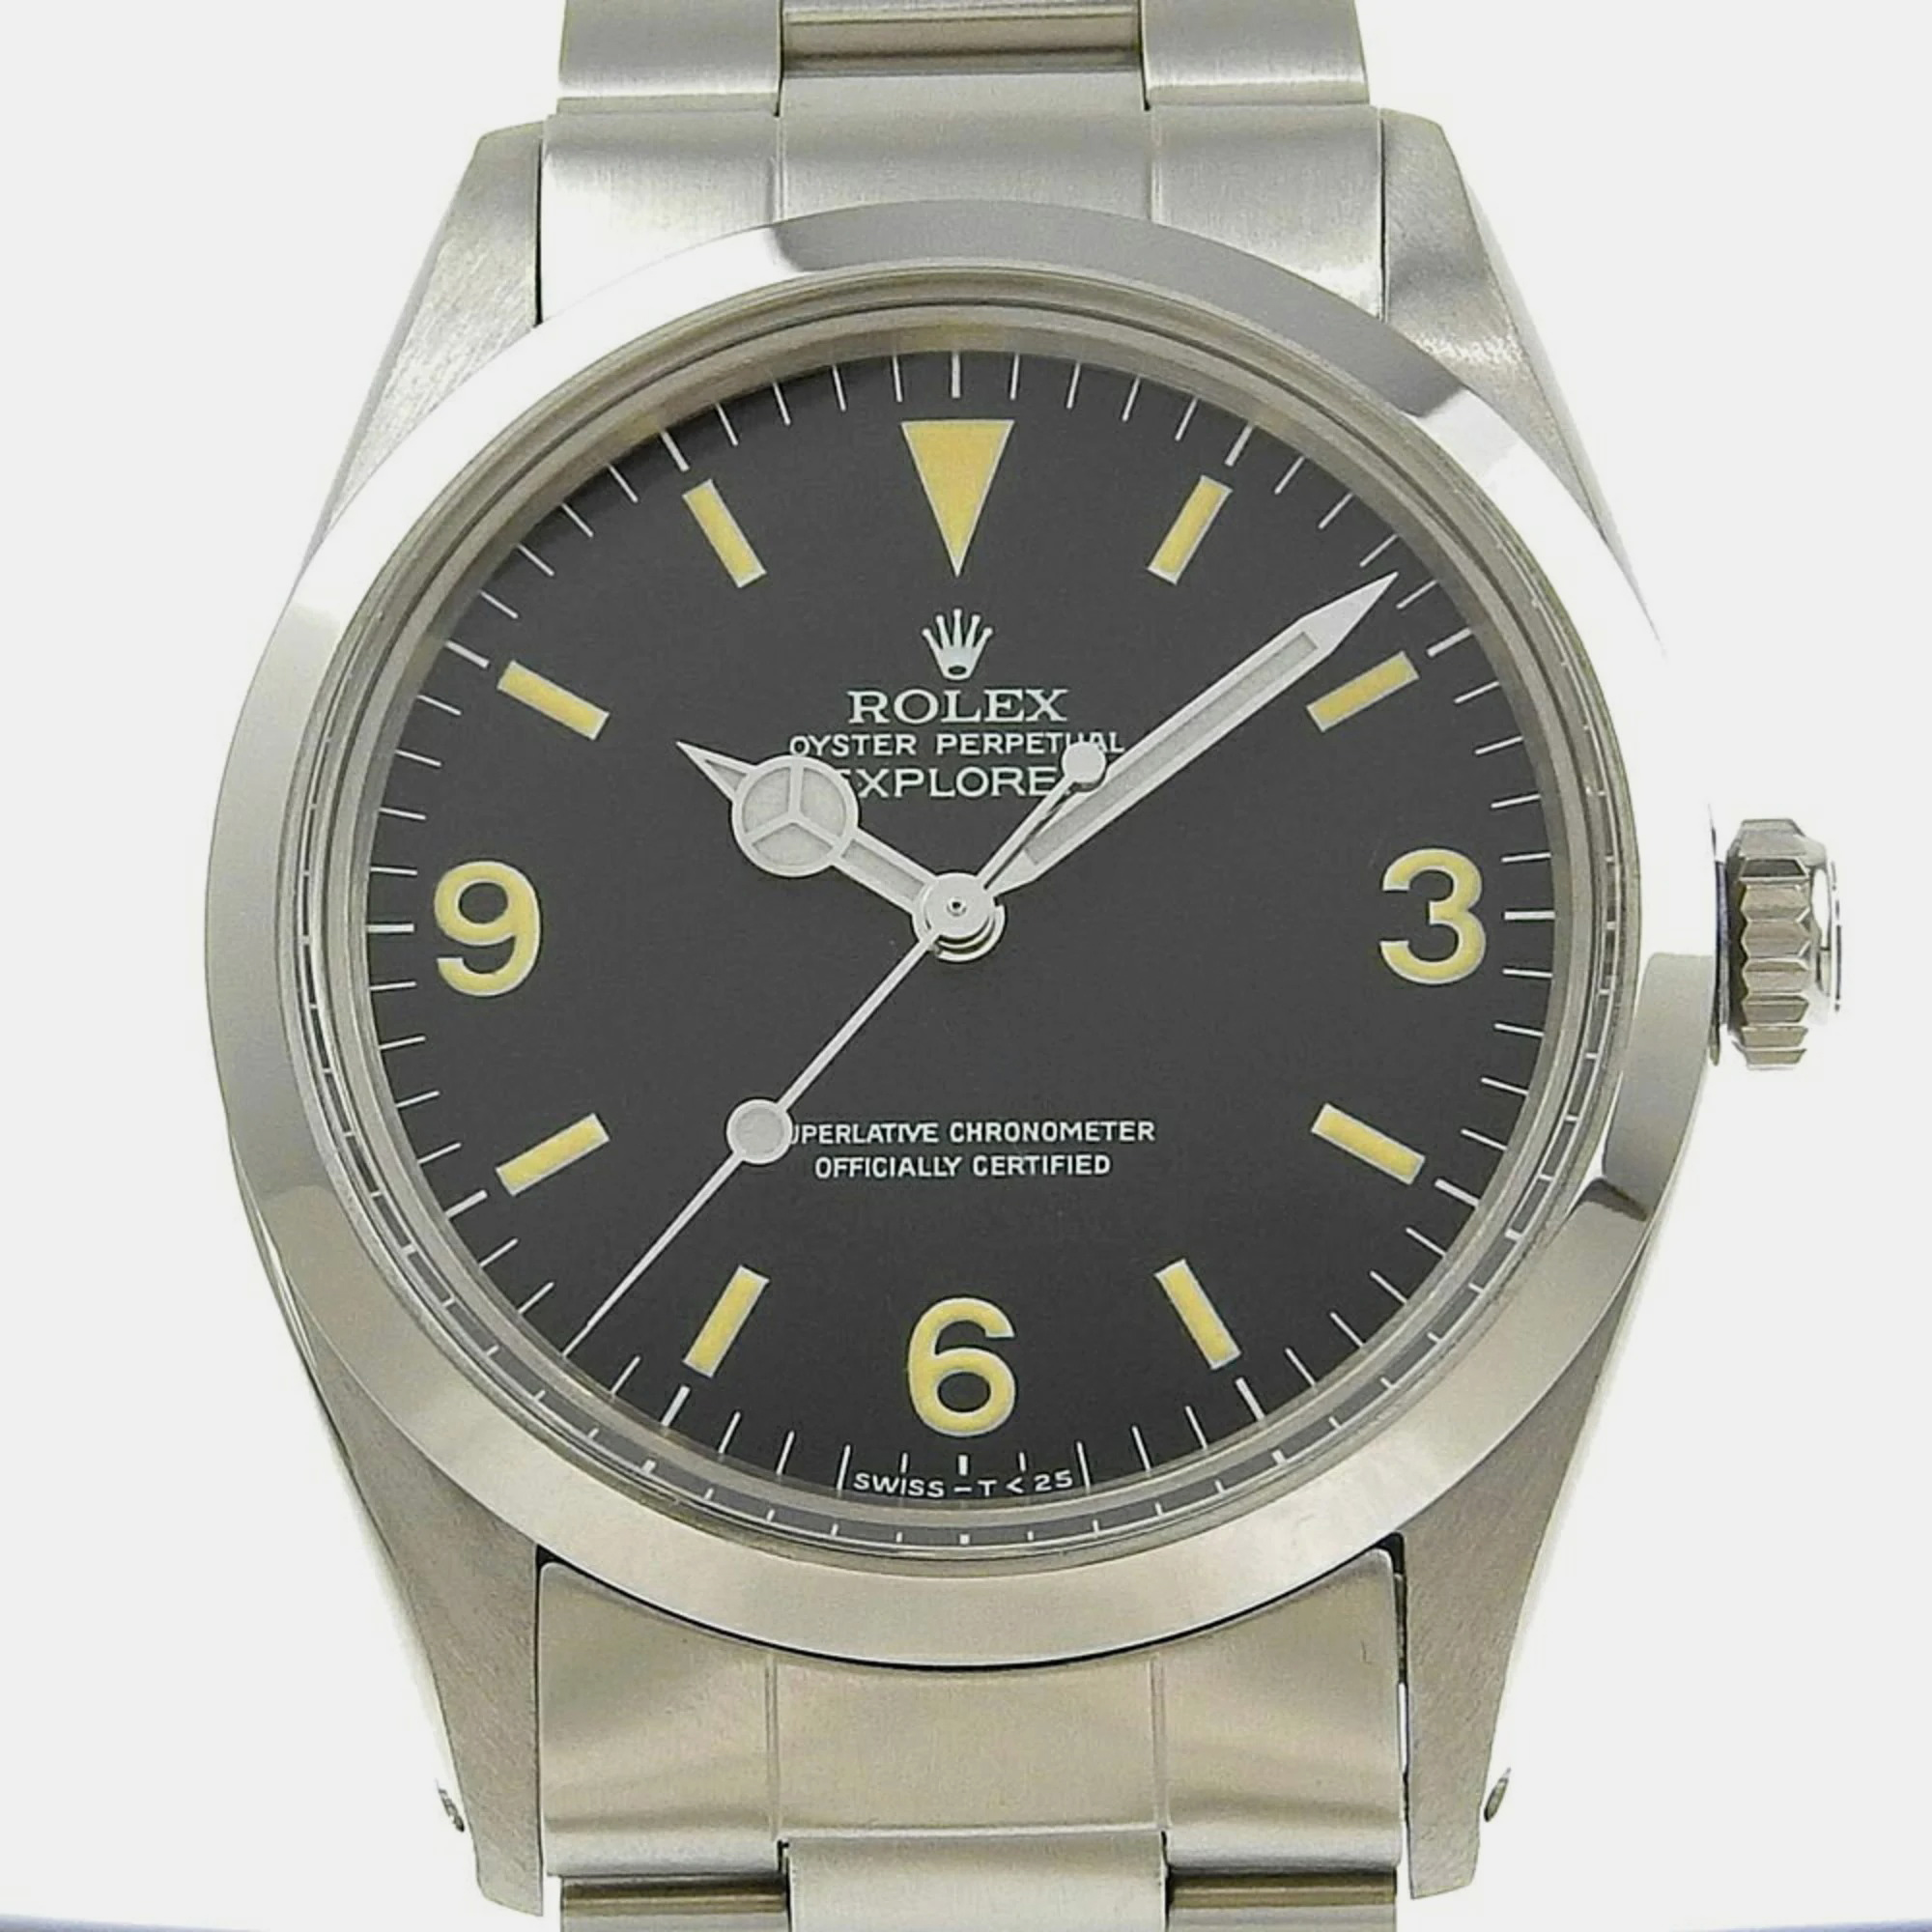 Pre-owned Rolex Silver Stainless Steel Explorer M1016 Automatic Men's Wristwatch 36 Mm